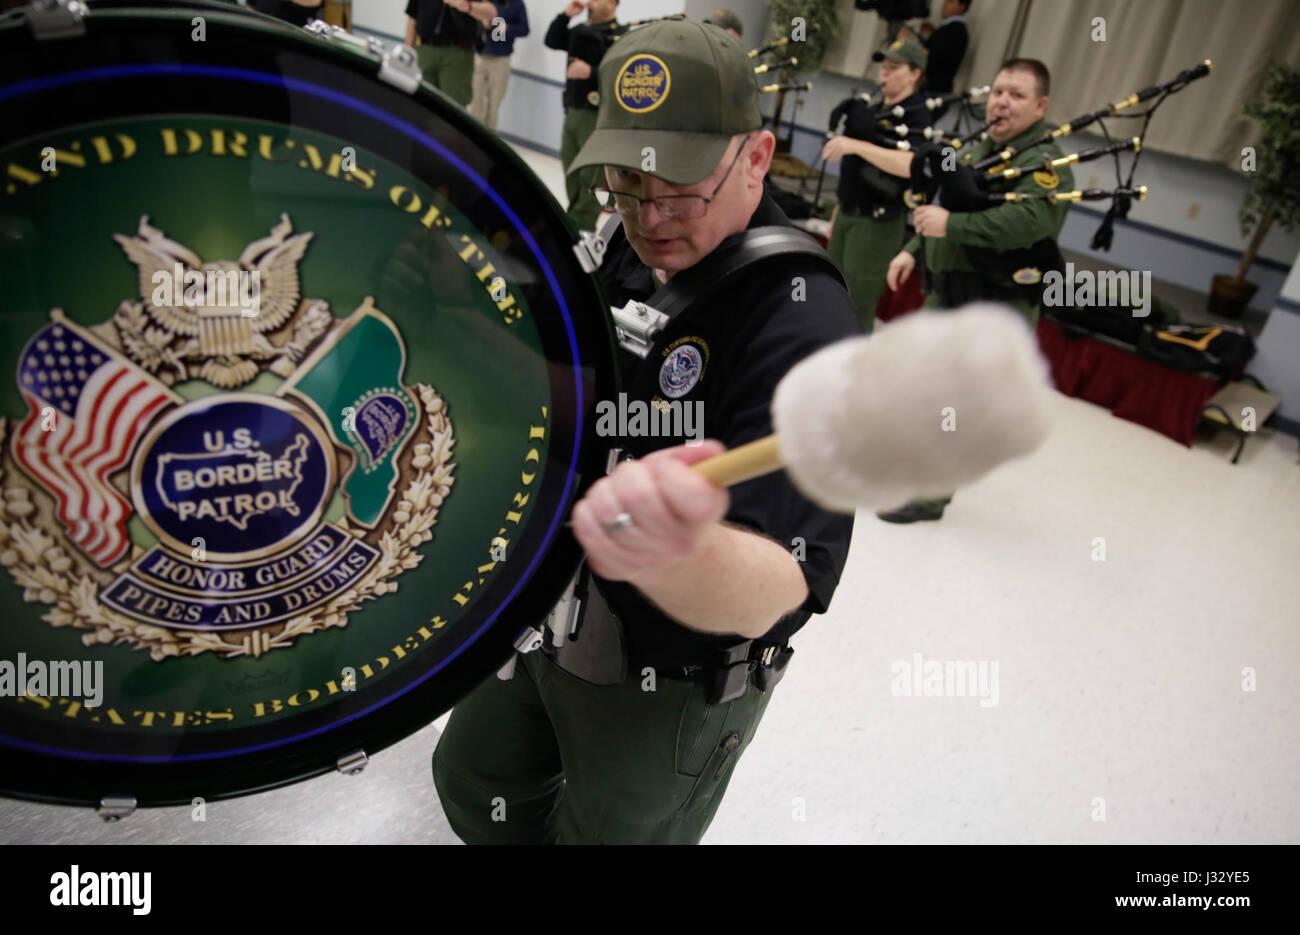 Members of the U.S. Border Patrol Pipes and Drums Band rehearse at the Woodbridge Elks Lodge in Dale City, Va., January 18, 2017, in preparation for the inauguration of the 45th President, Donald J. Trump. U.S. Customs and Border Protection Photo by Glenn Fawcett Stock Photo